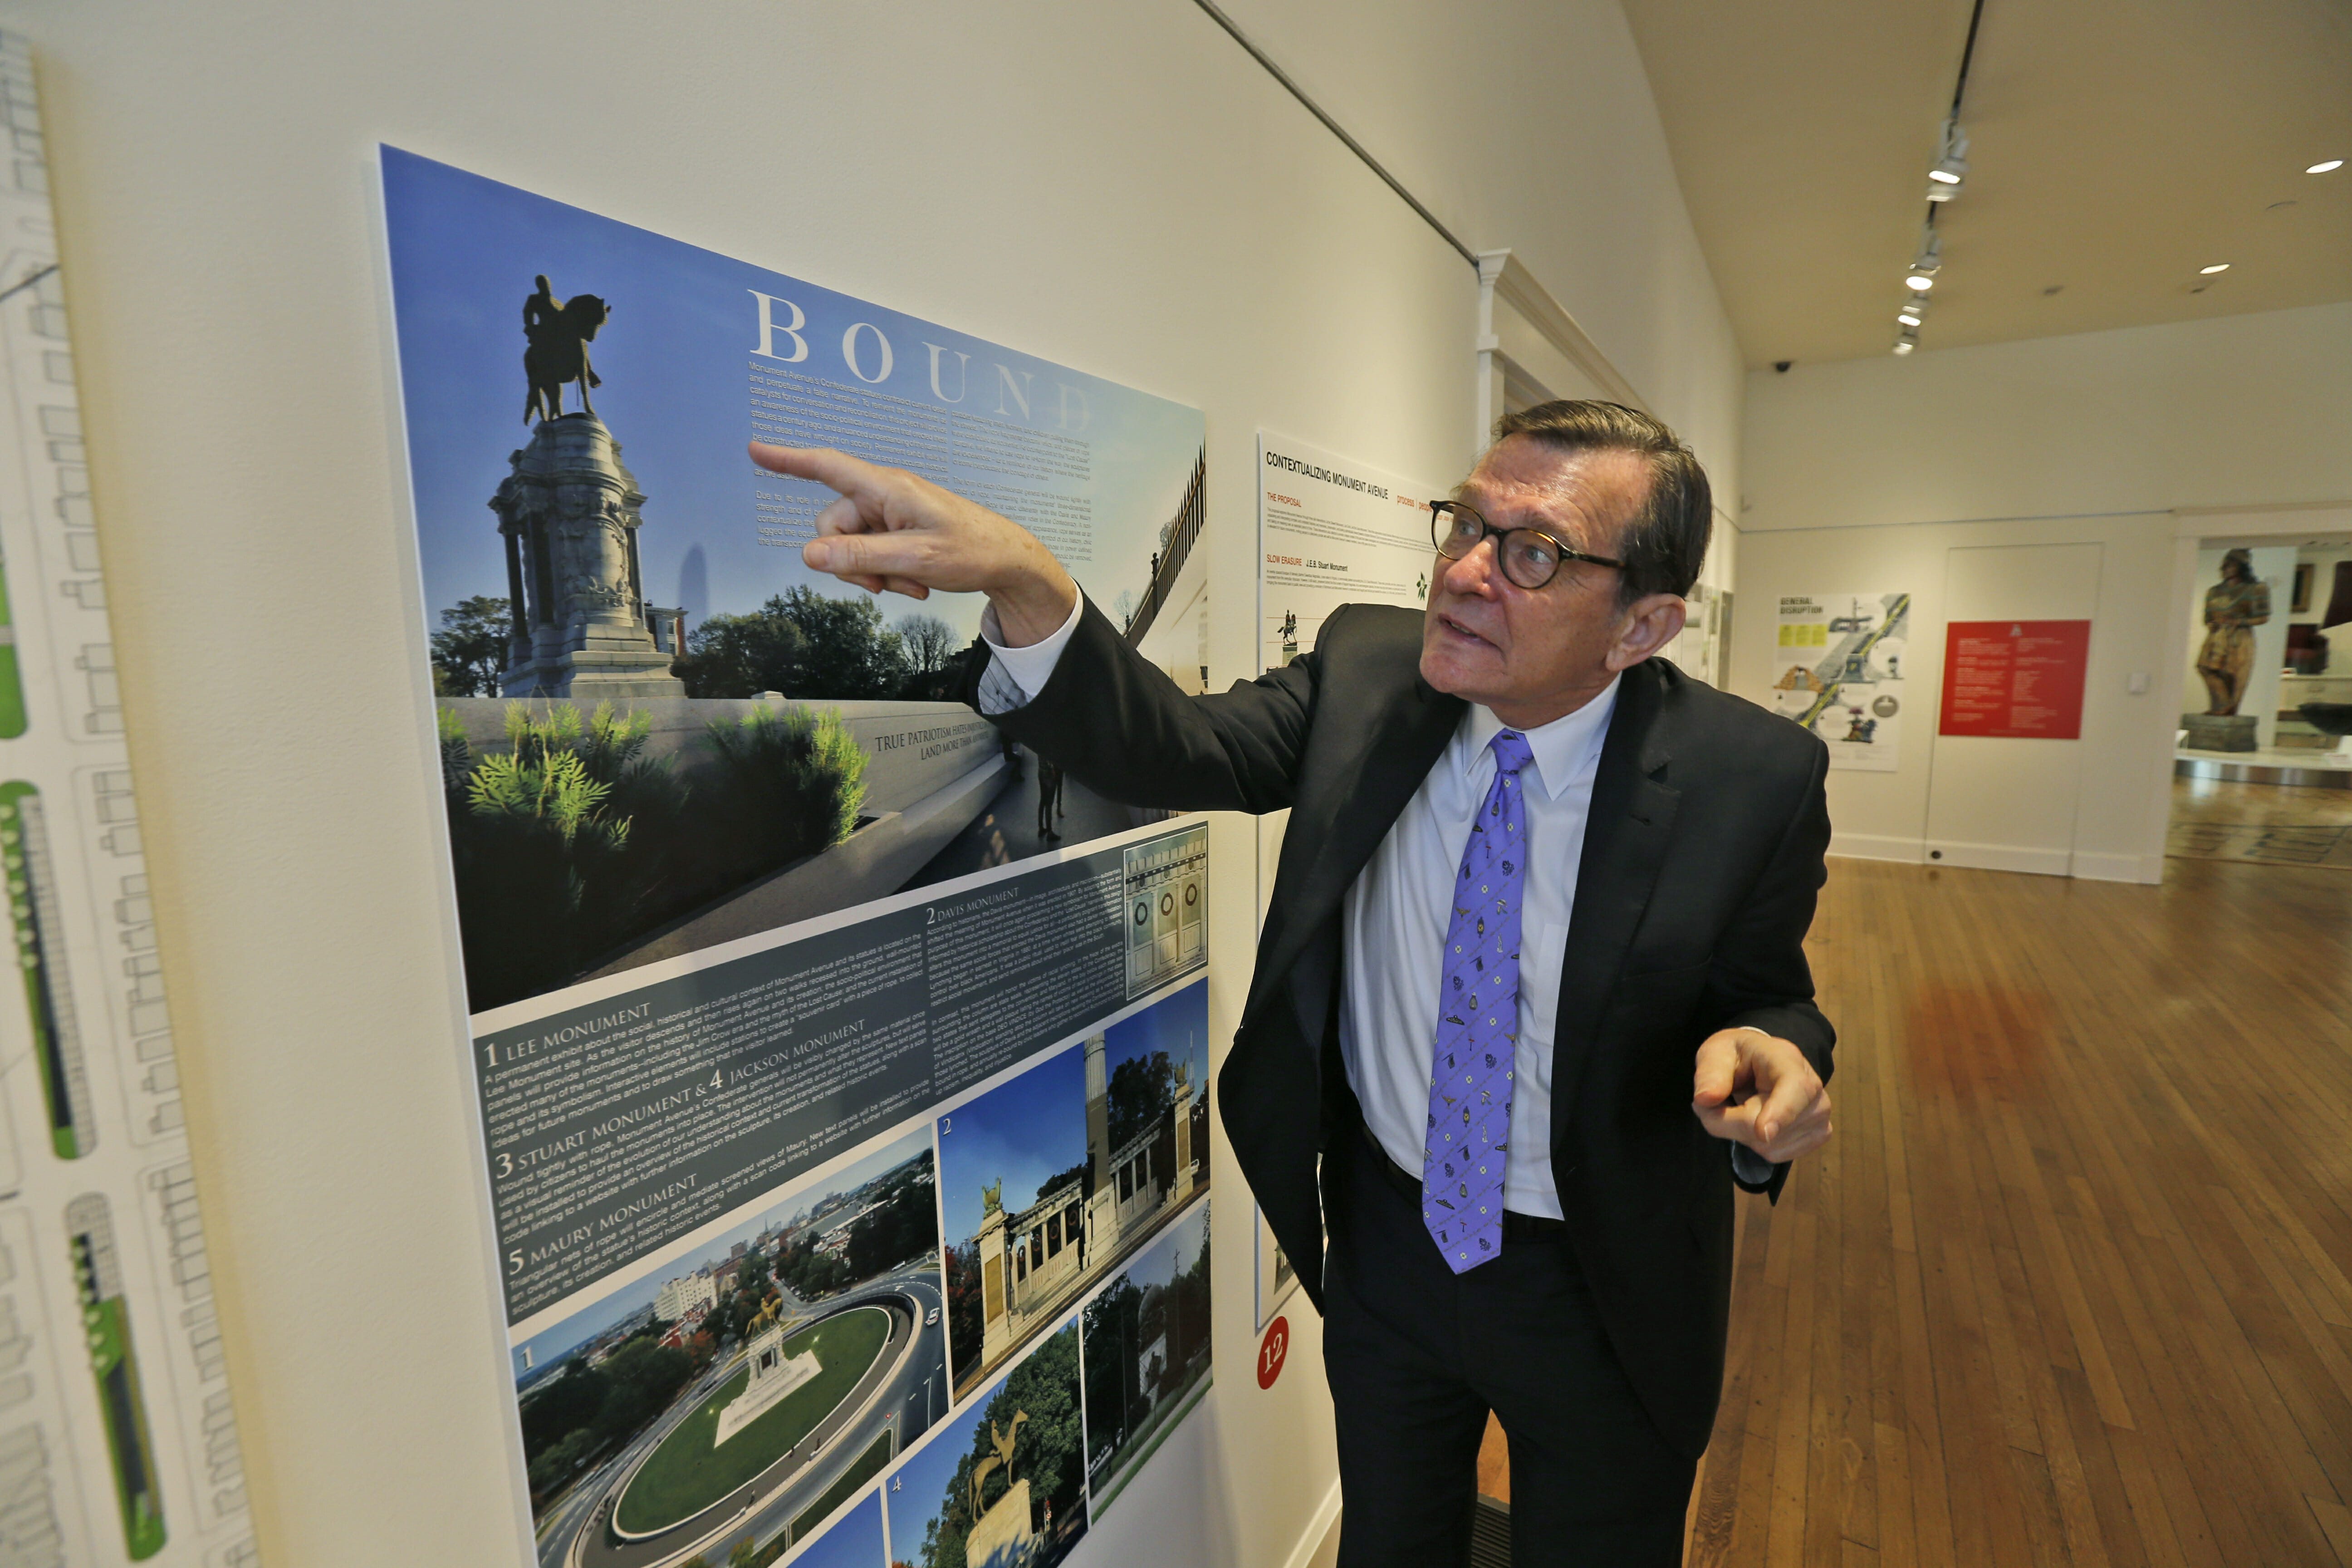 Director of the Valentine museum Bill Martin gestures as he looks over one of the proposals for changes to Confederate statues on Monument Avenue in Richmond, Virginia, Tuesday, Feb. 26, 2019.